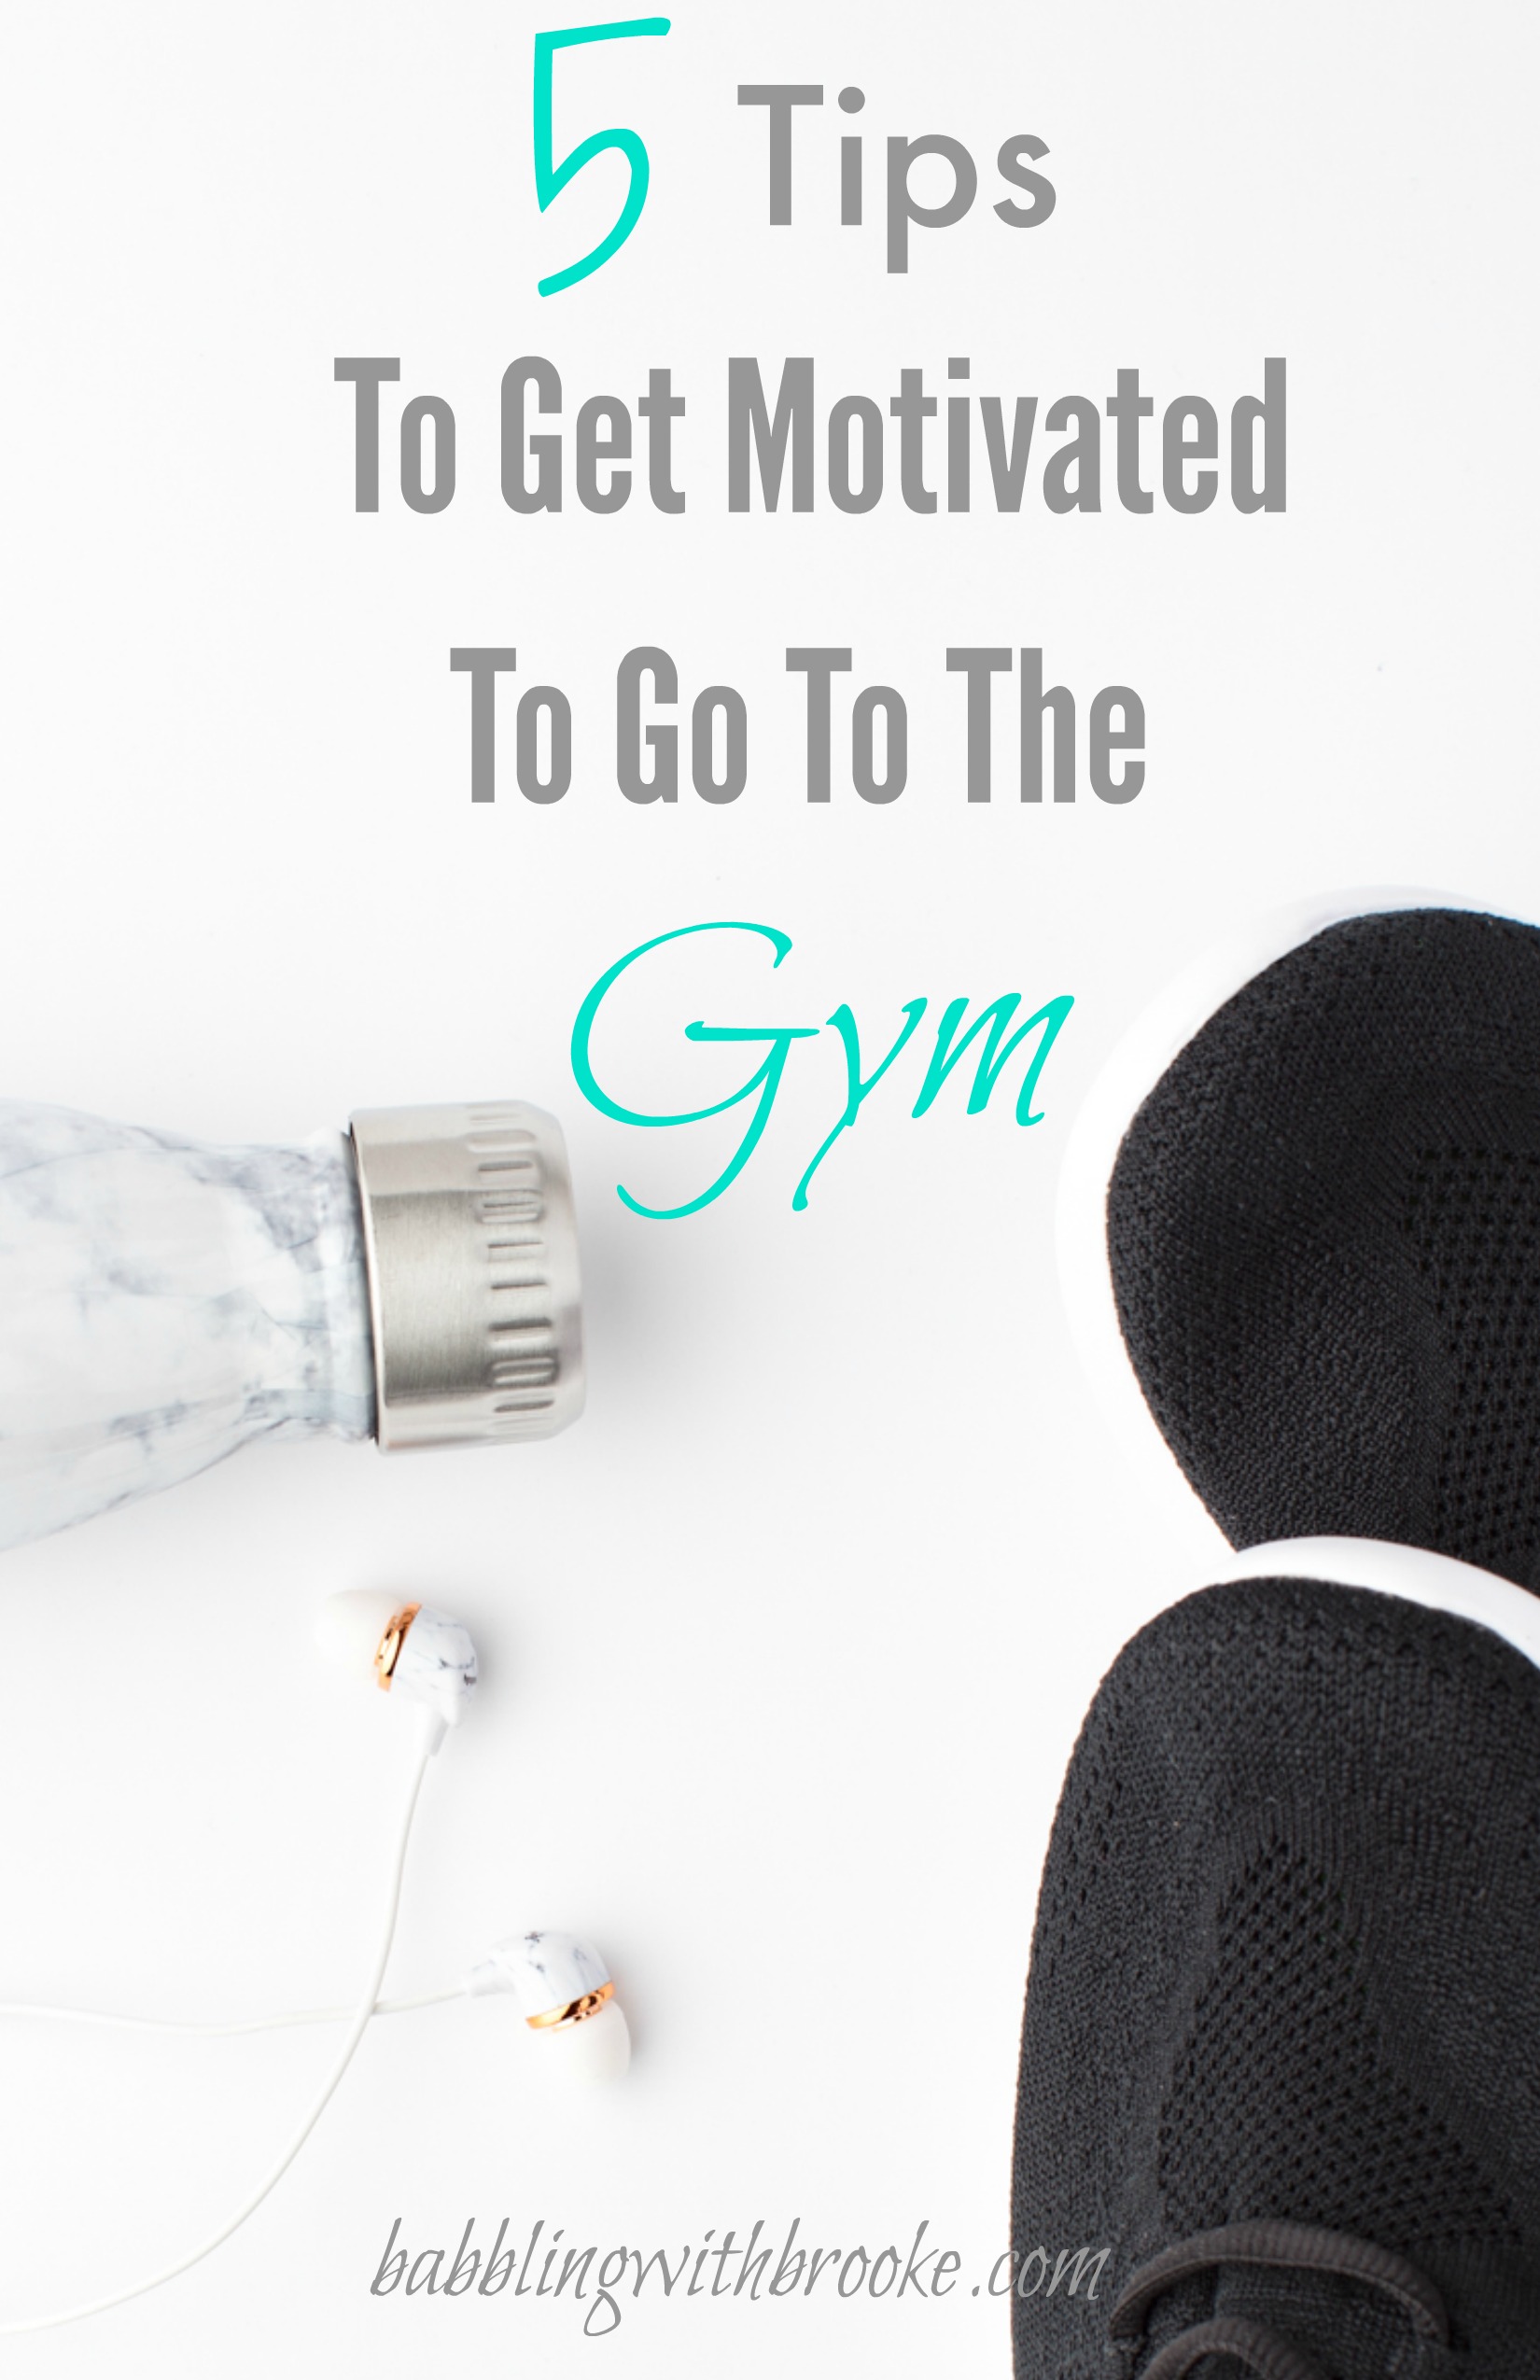 5 Easy Ways to Get Motivated To Go To The Gym!